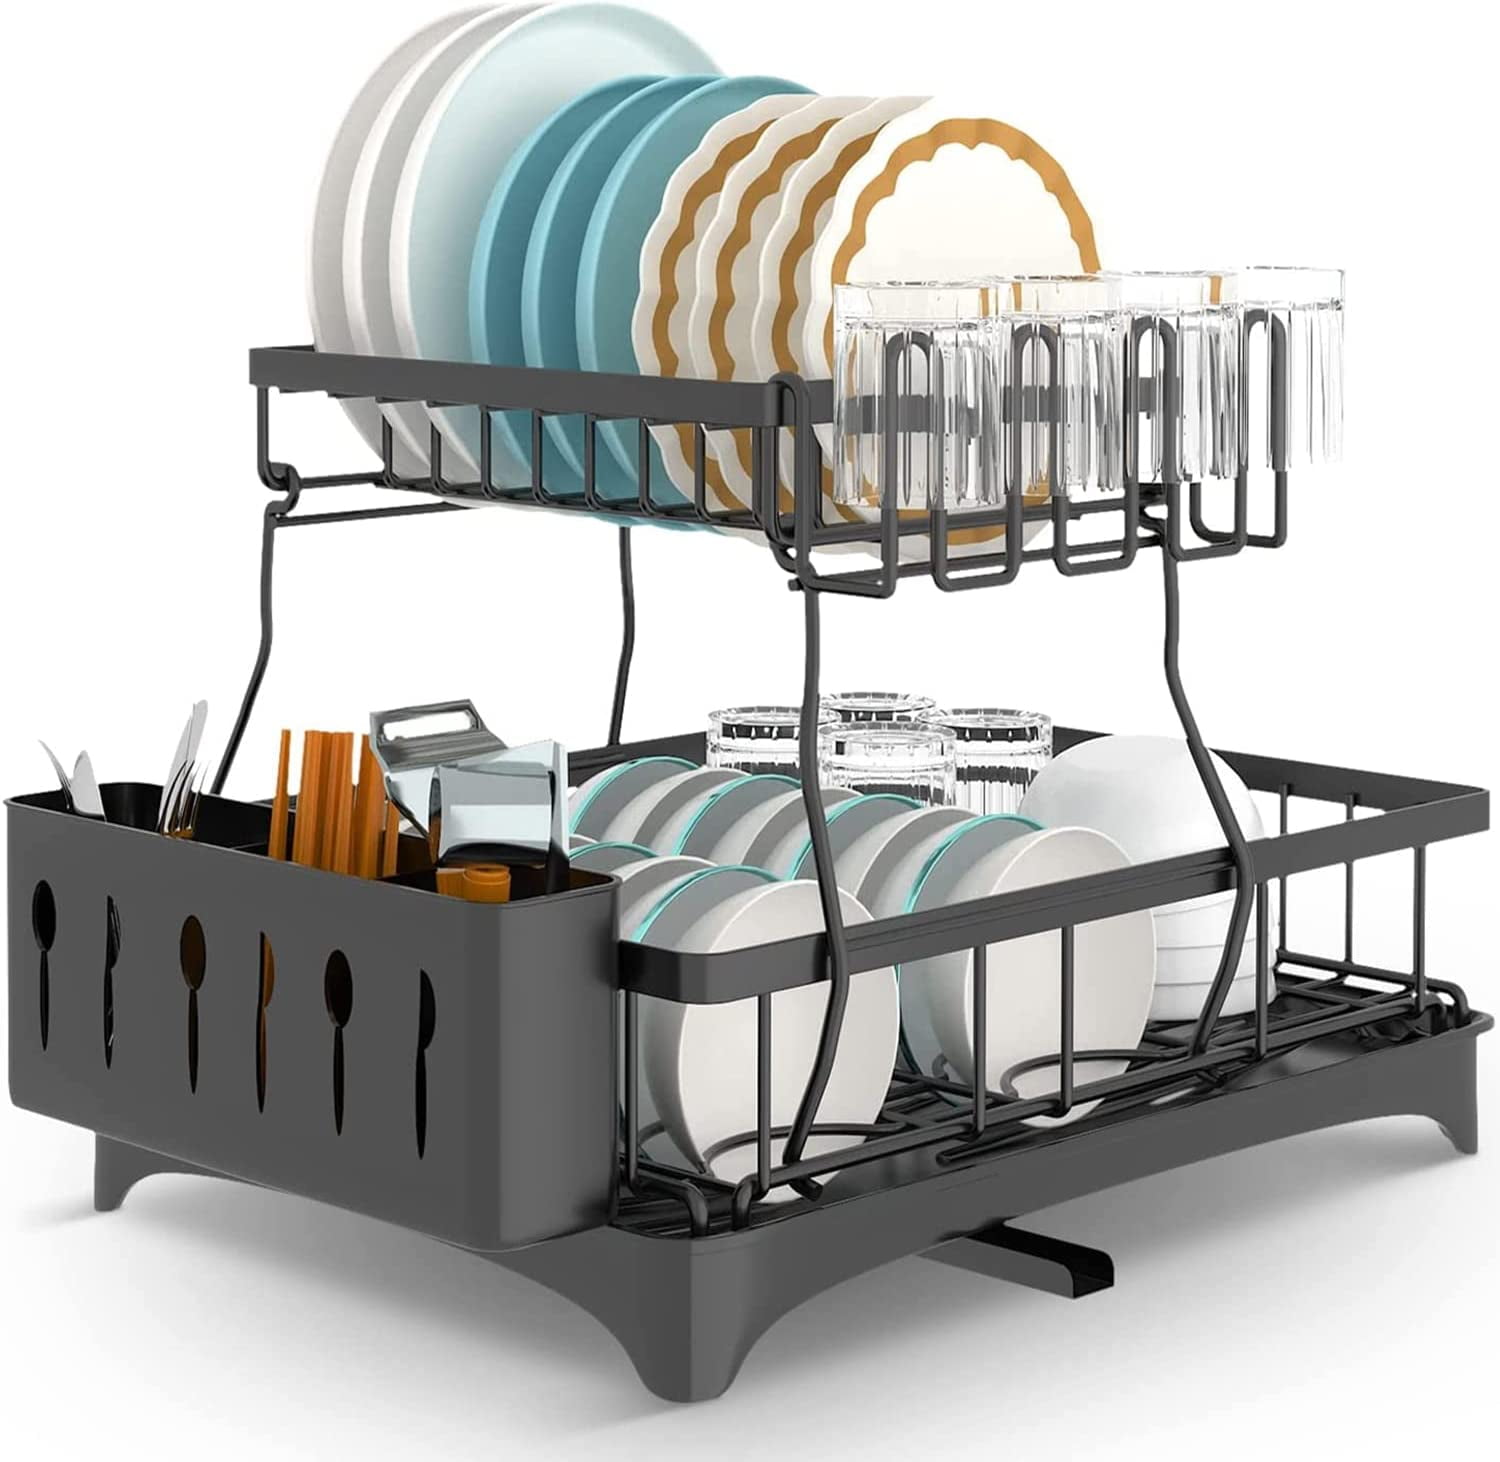 Wahopy Heavy Duty 2 Tier Dish Drying Rack with Drainboard for Kitchen  Counter, Stainless Steel Dish Drying Rack with Cups, Forks, Knives, Utensil